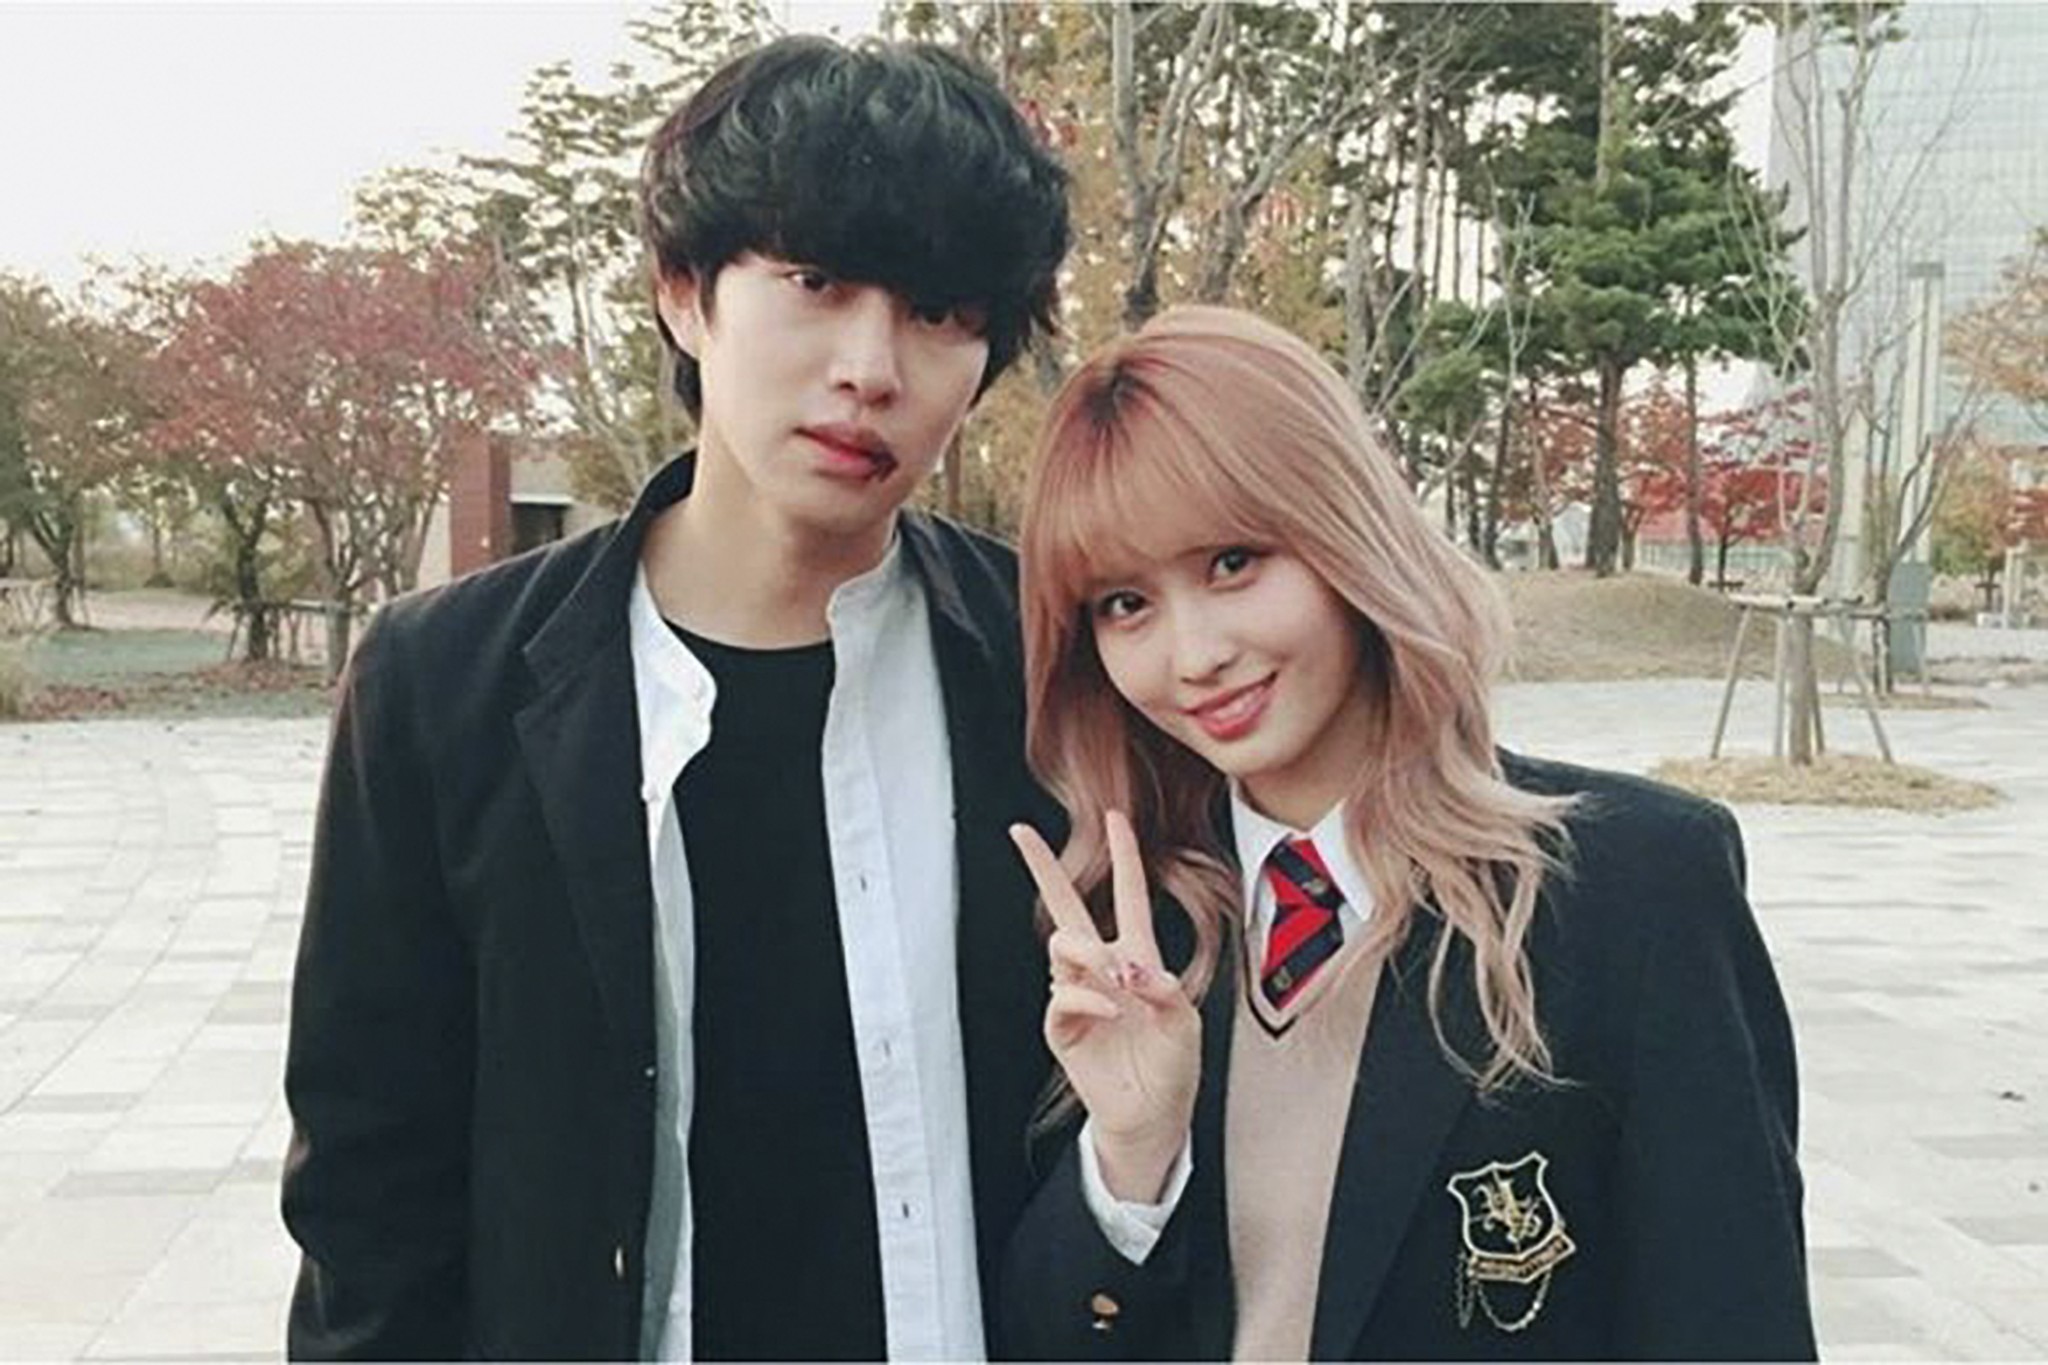 Sweet dreams are made of this – Hee-chul and Momo reportedly became close after appearing together in a television show in 2017. Photo: heechul.momoring/Instagram